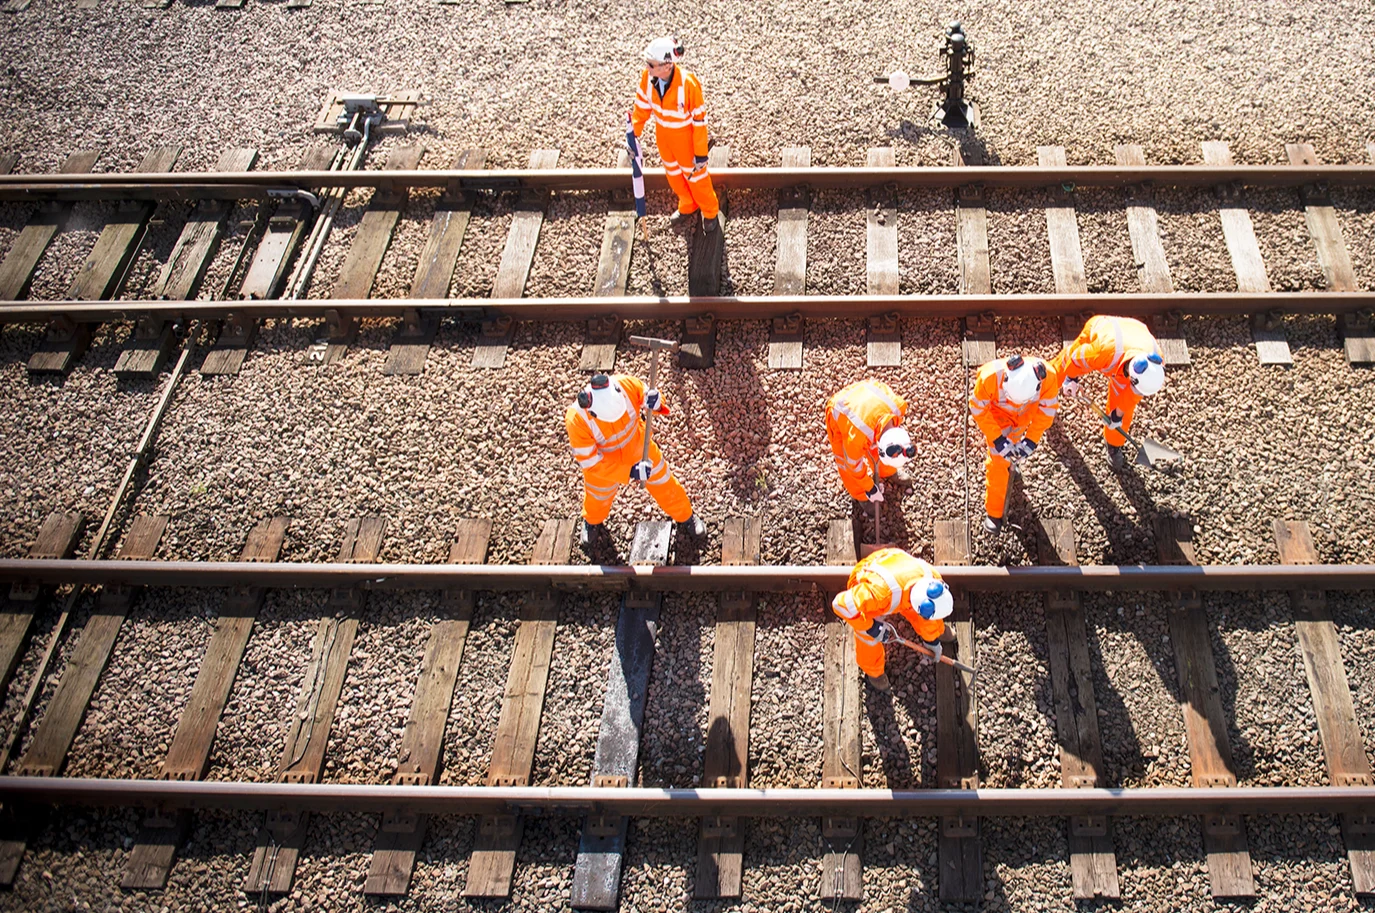 6 workers in orange jumpsuits and white hardhats working on a train track in the daytime.